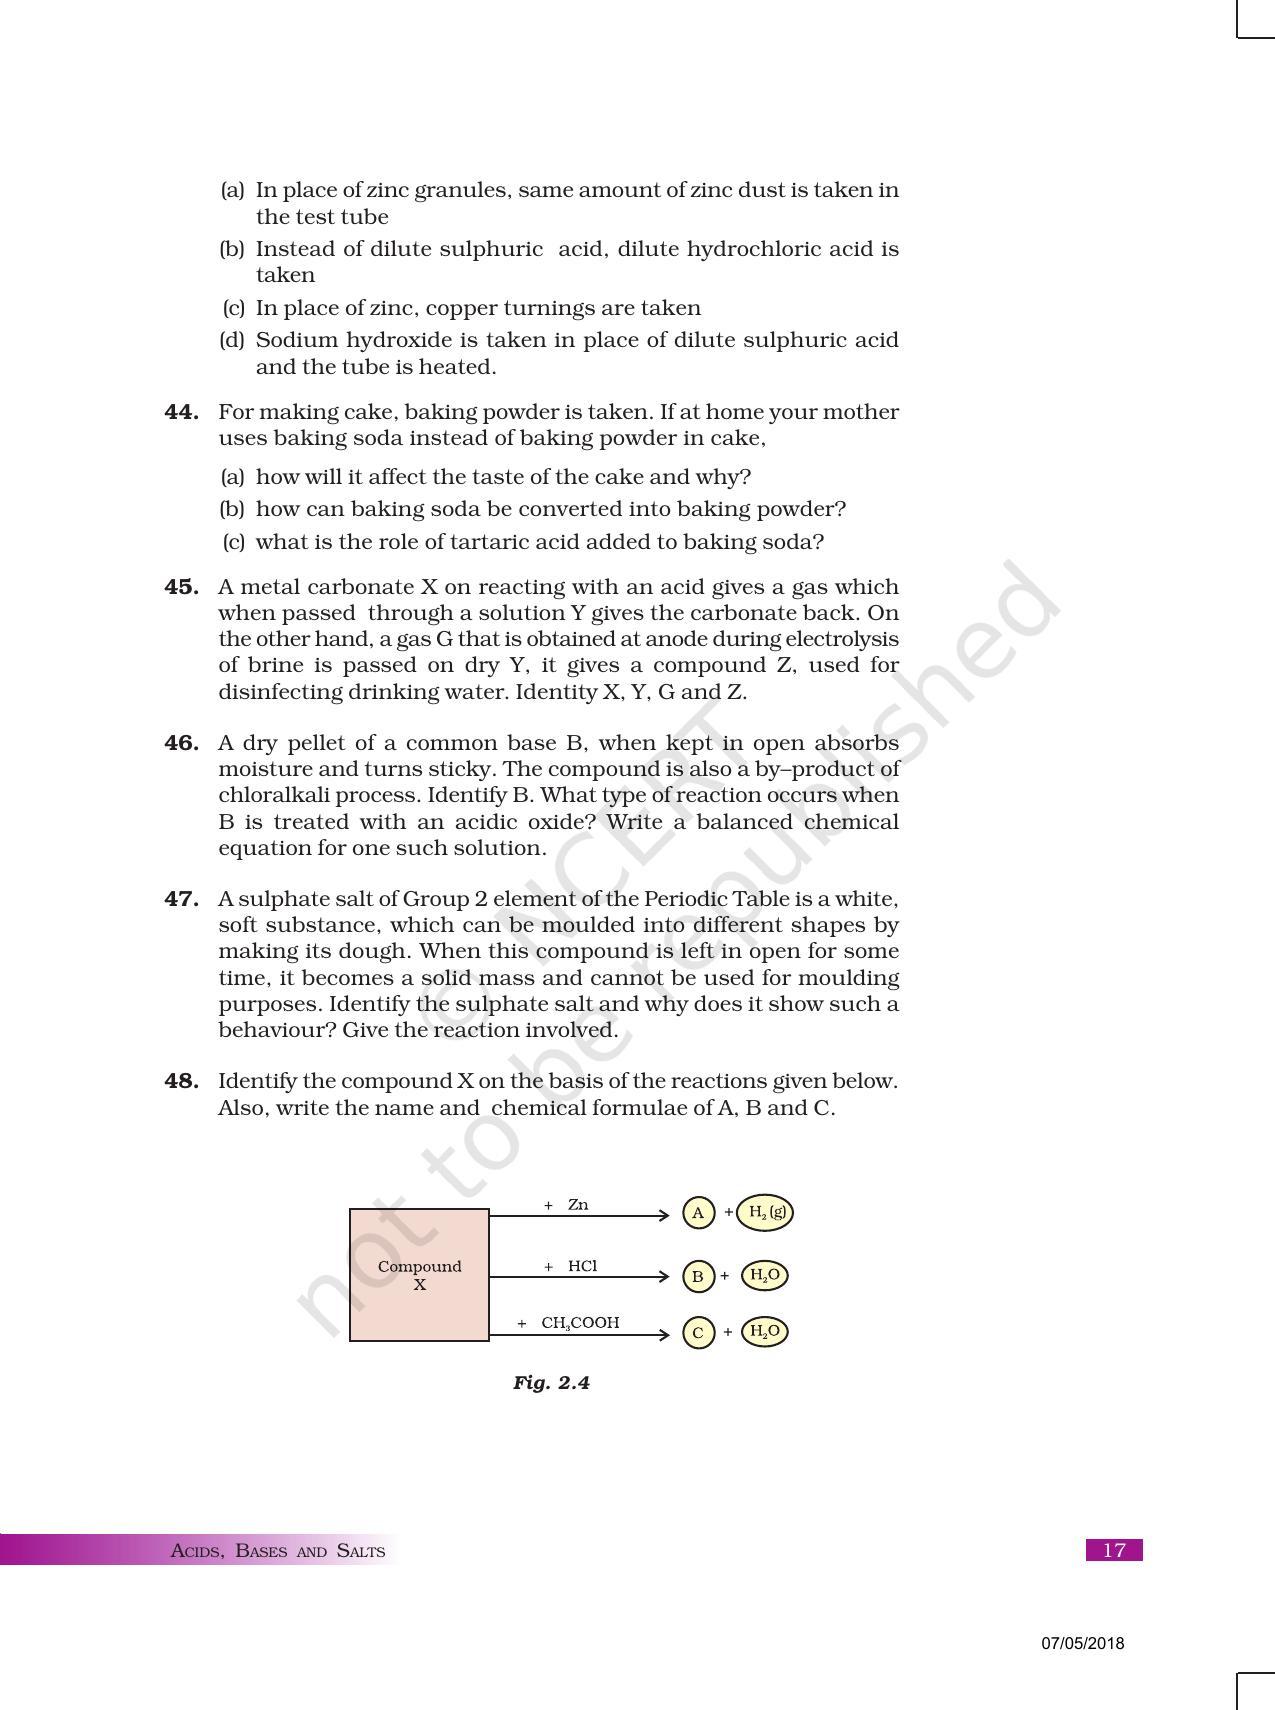 NCERT Exemplar Book for Class 10 Science: Chapter 2 Acids, Bases, and Salts - Page 9